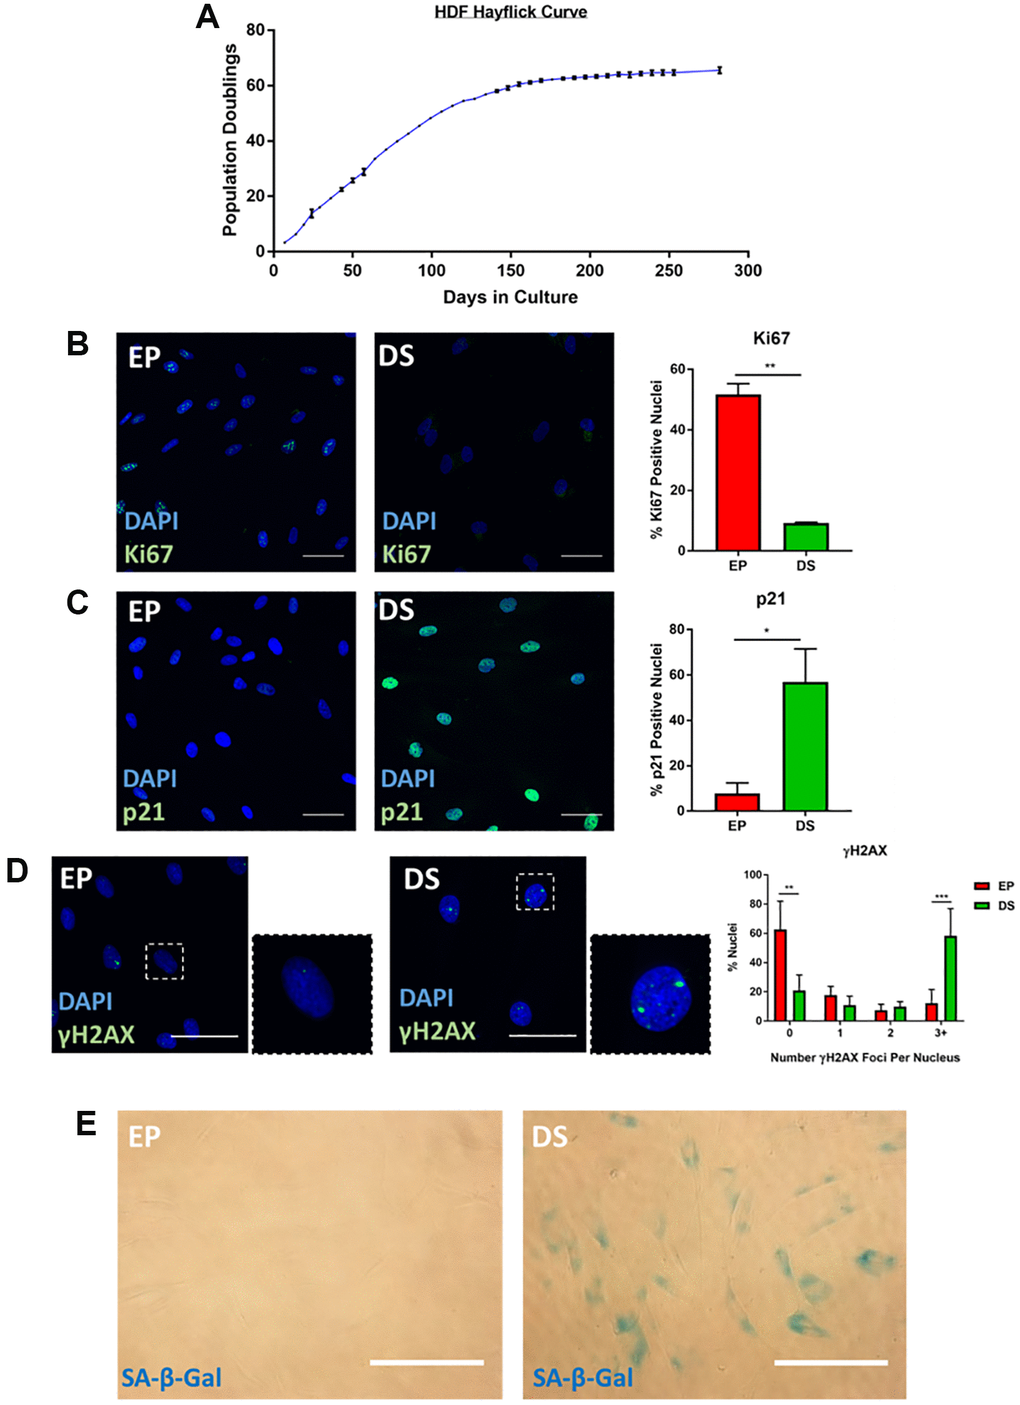 Characterisation of senescence in human dermal fibroblasts (HDFs). (A) Hayflick proliferation curve for human dermal fibroblasts (HDFs) from early proliferation (EP) to deep senescence (DS) through serial cell culture. N = 2–6. (B) Immunofluorescence staining of DAPI (blue) and Ki67 (green) in EP and DS HDFs. N = 2. Scale bar = 50 μm; (C) Immunofluorescence staining of DAPI (blue) and p21 (green) in EP and DS HDFs. N = 2. Scale bar = 50 μm (D) Immunofluorescence staining of DAPI (blue) and γ-H2AX foci (green) in EP and DS HDFs. N = 3. Scale bar = 50 μm. (E) Brightfield assessment of SA-β-Gal (blue) in EP and DS HDFs. N = 2. Scale bar = 100 μm.